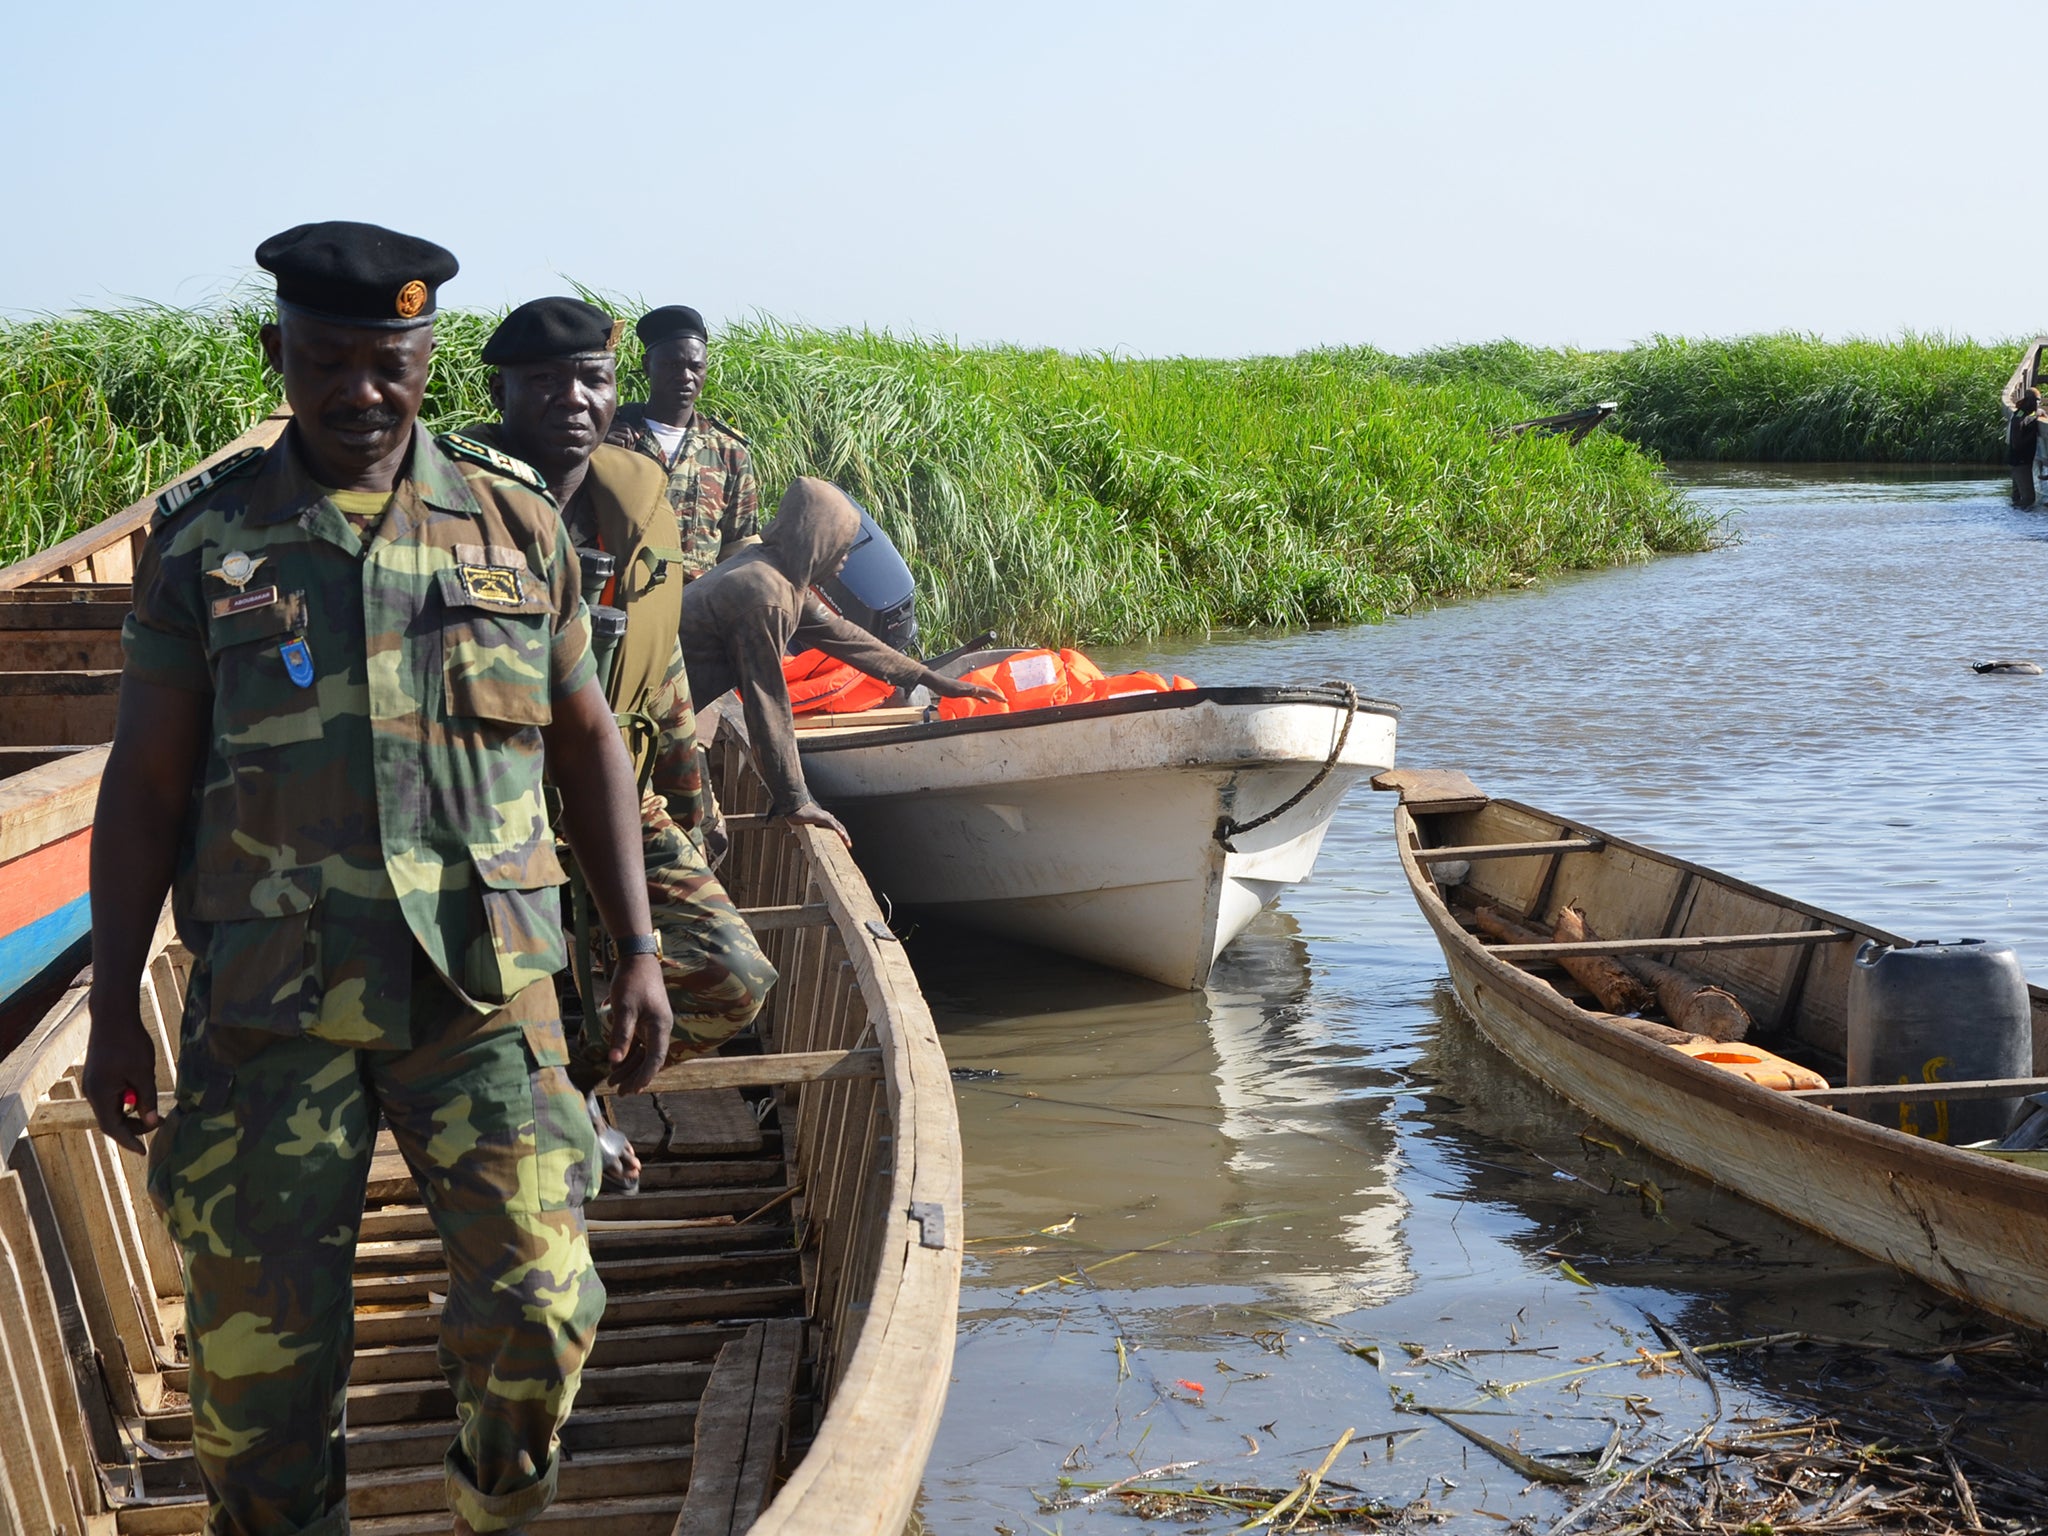 Lake Chad has been a favourite hiding place for Islamist Boko haram fighters